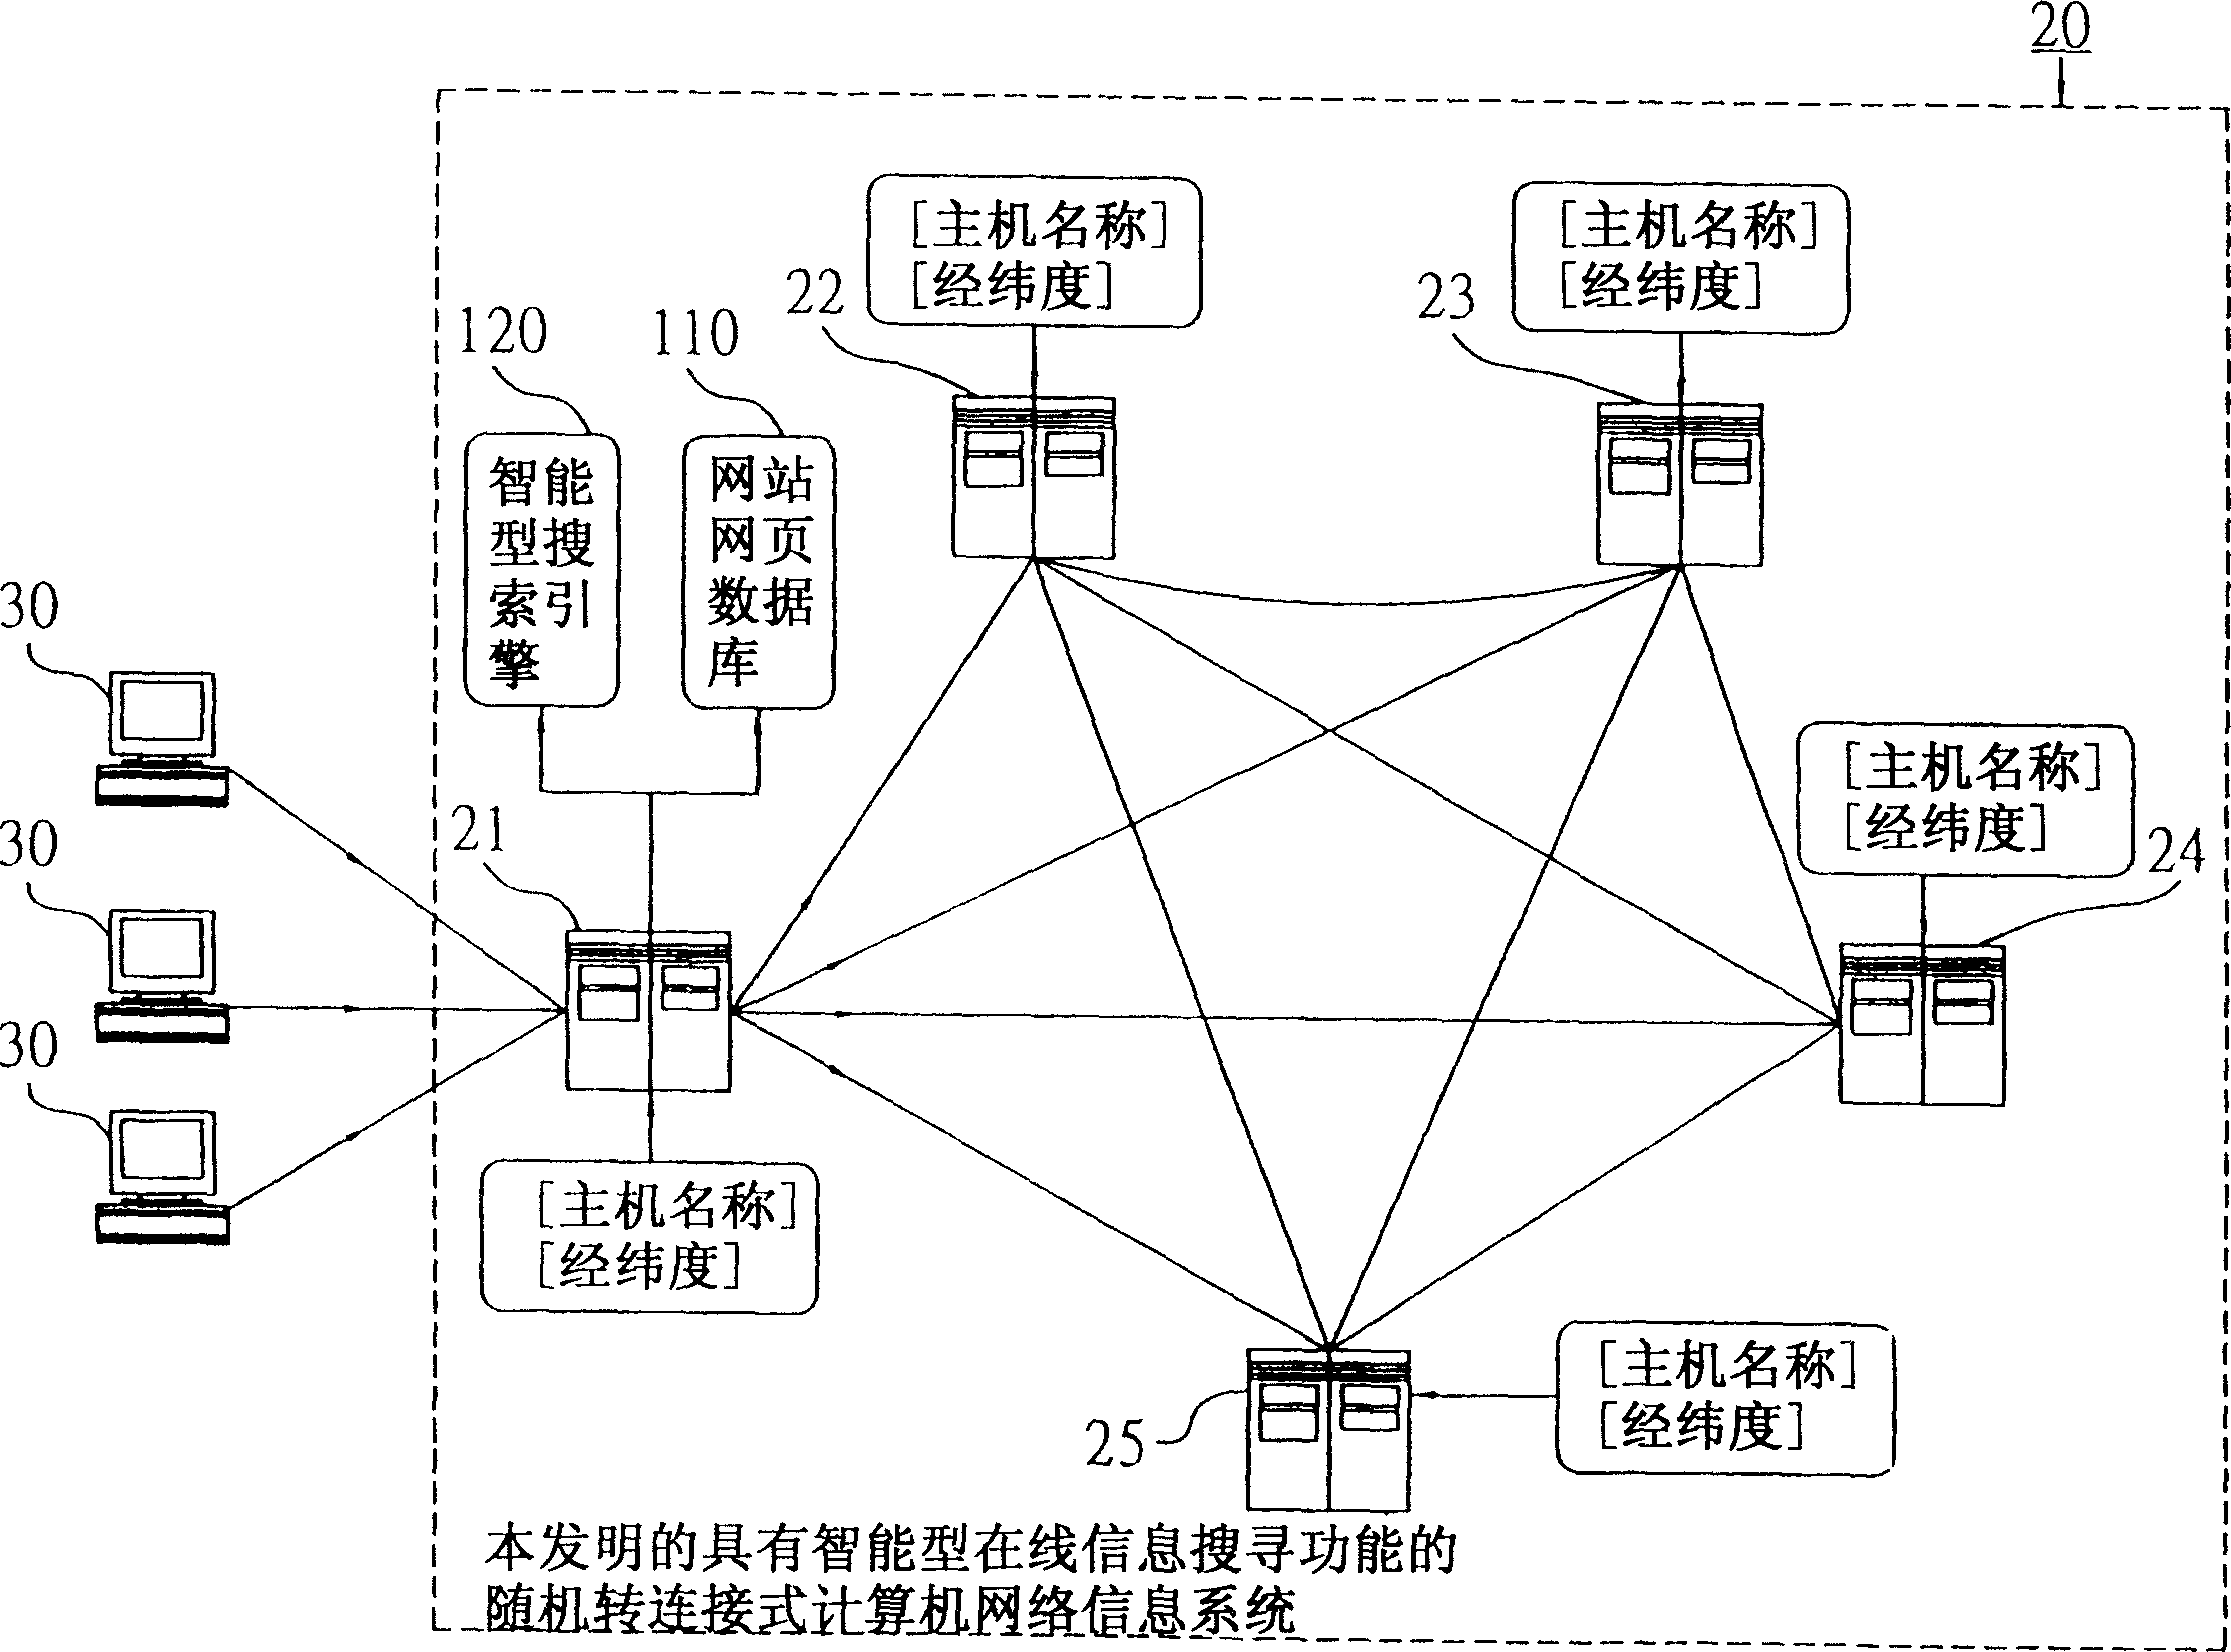 Random switchover type computer network information system possessing intelligent type online information searching function